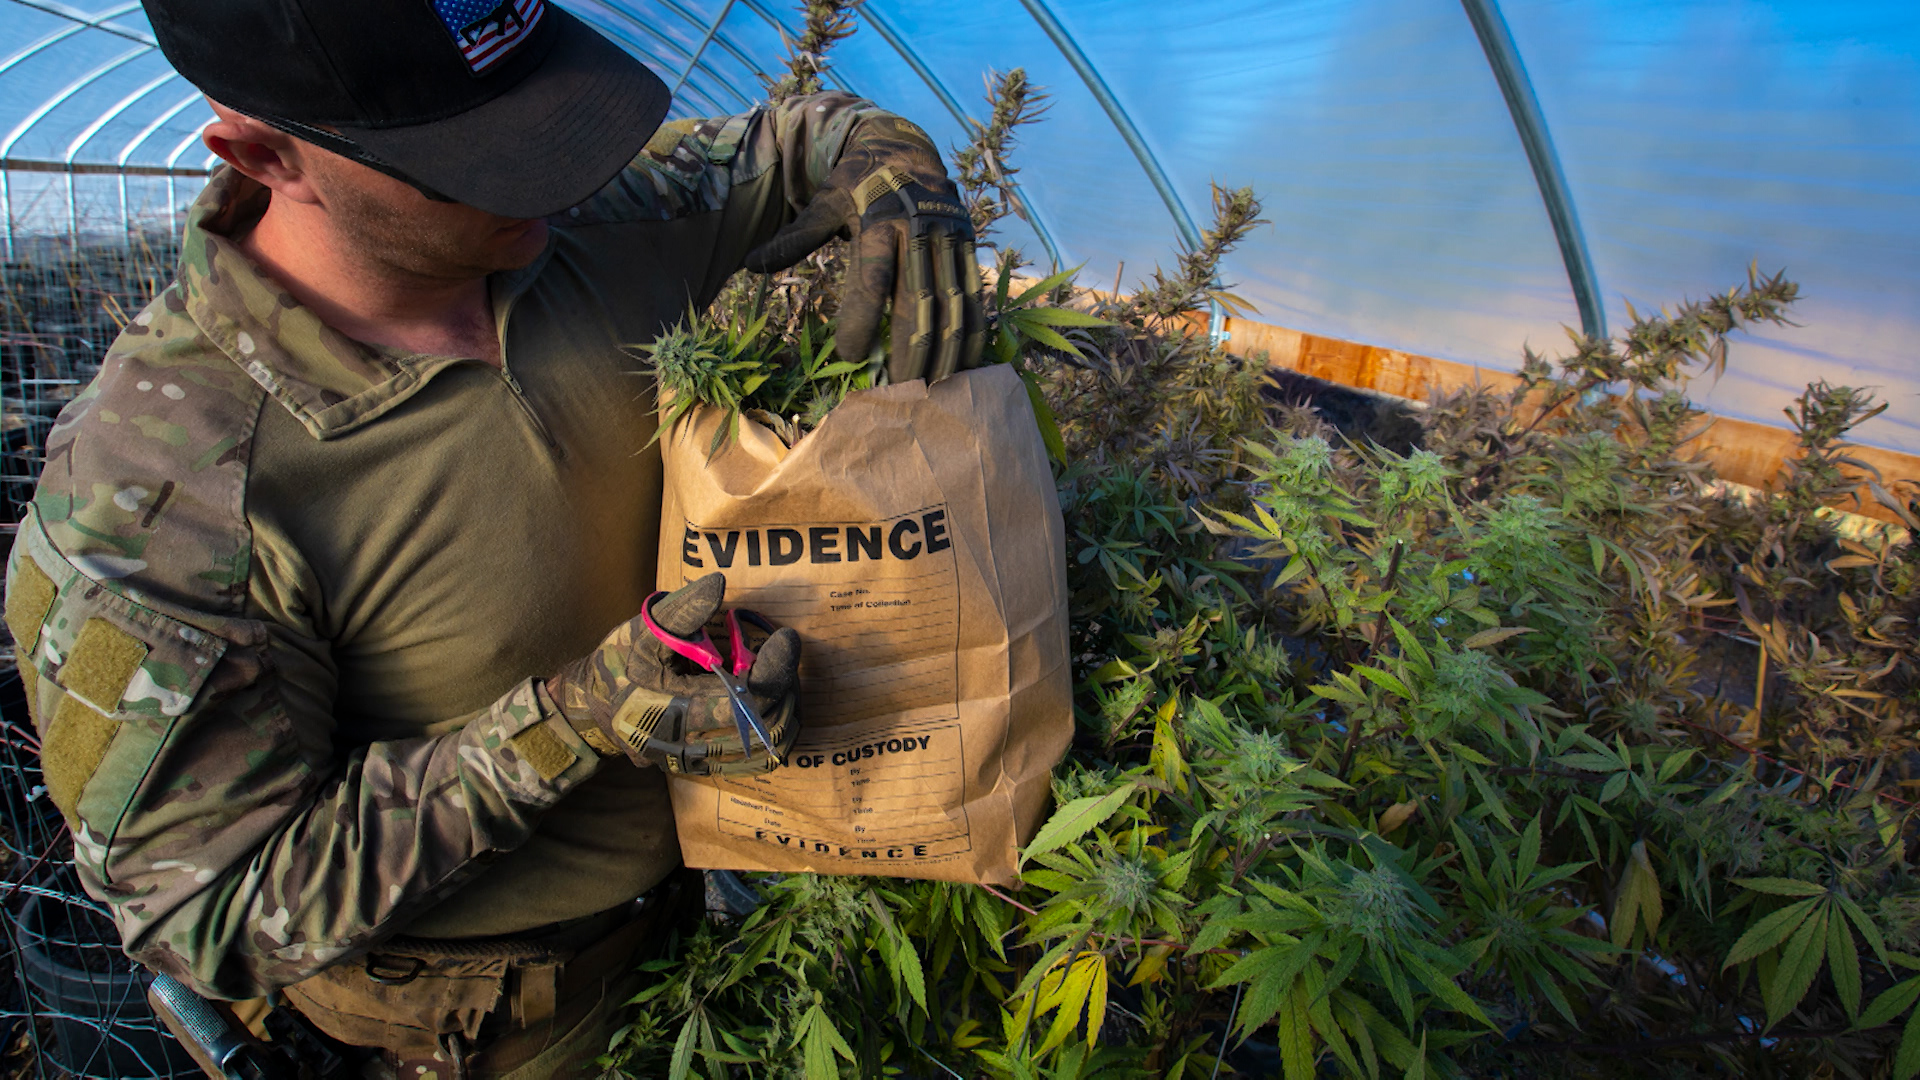 A man dressed in military dress is confiscating marijuana plants as evidence.